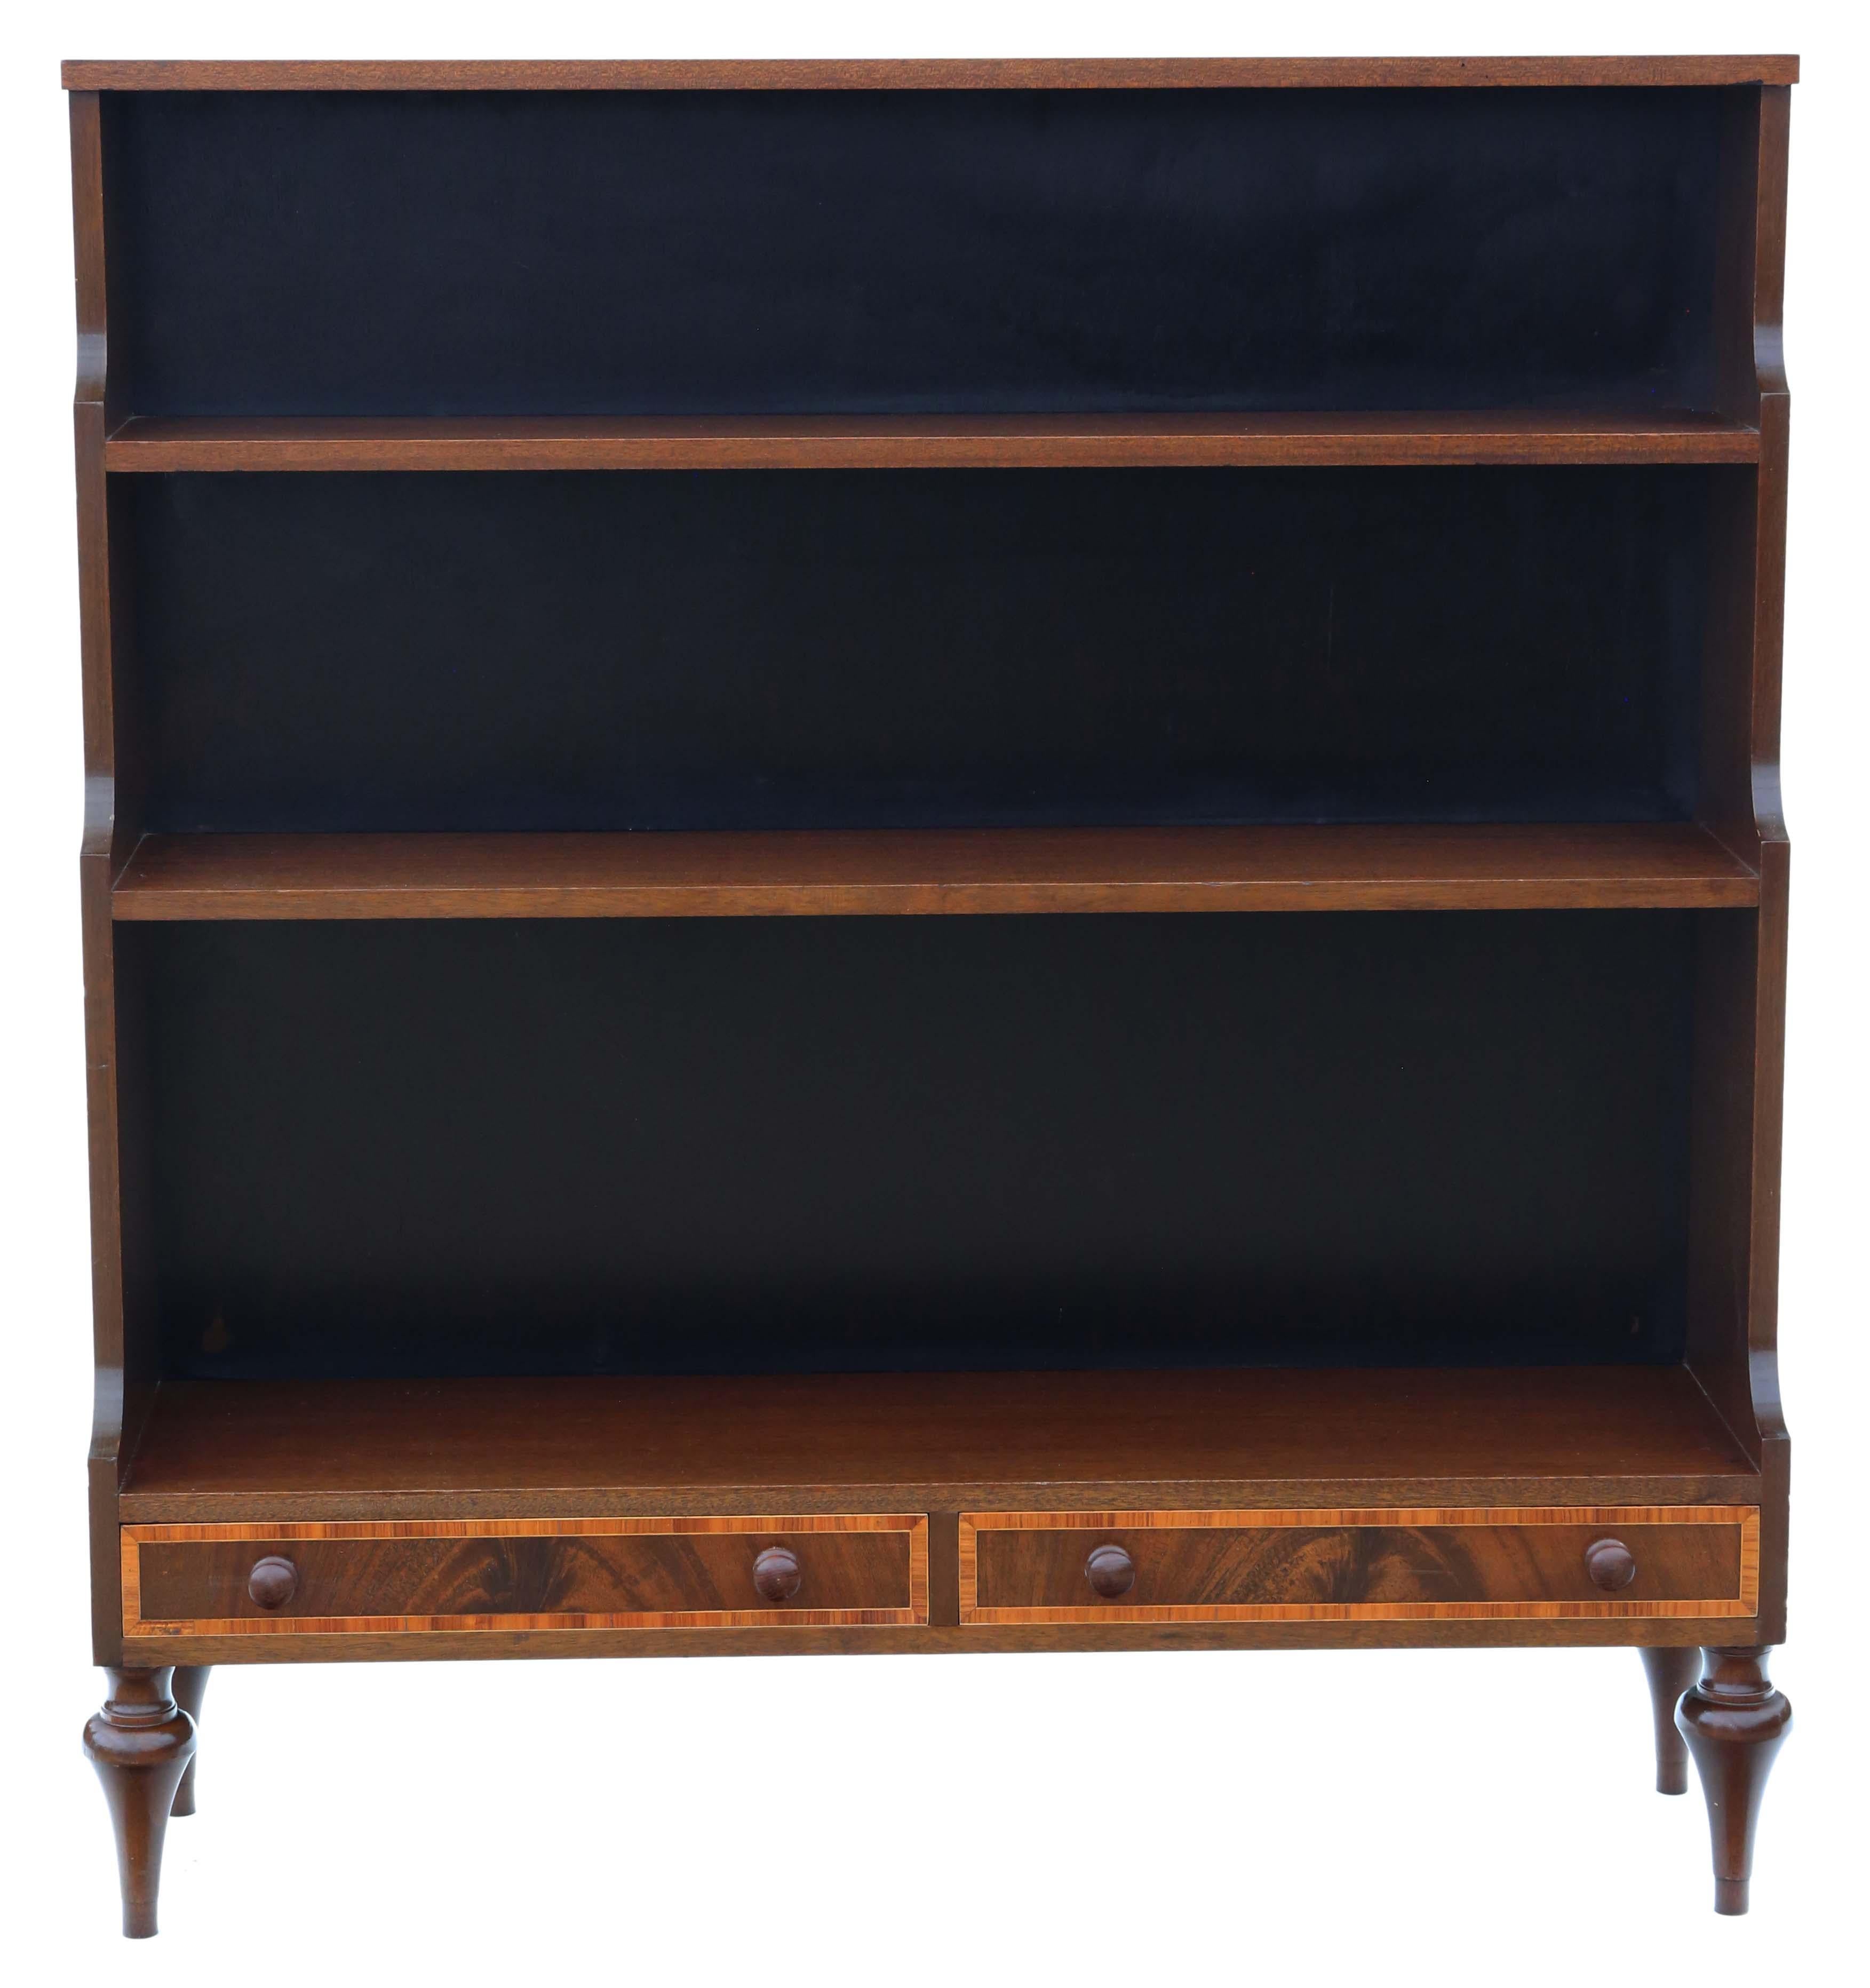 Antique vintage retro fine quality large Victorian revival inlaid mahogany waterfall bookcase C1960.

Solid and strong, with no loose joints or woodworm.

The oak lined drawers with crossbanding and hand cut dovetails slide freely. Elegant tapered